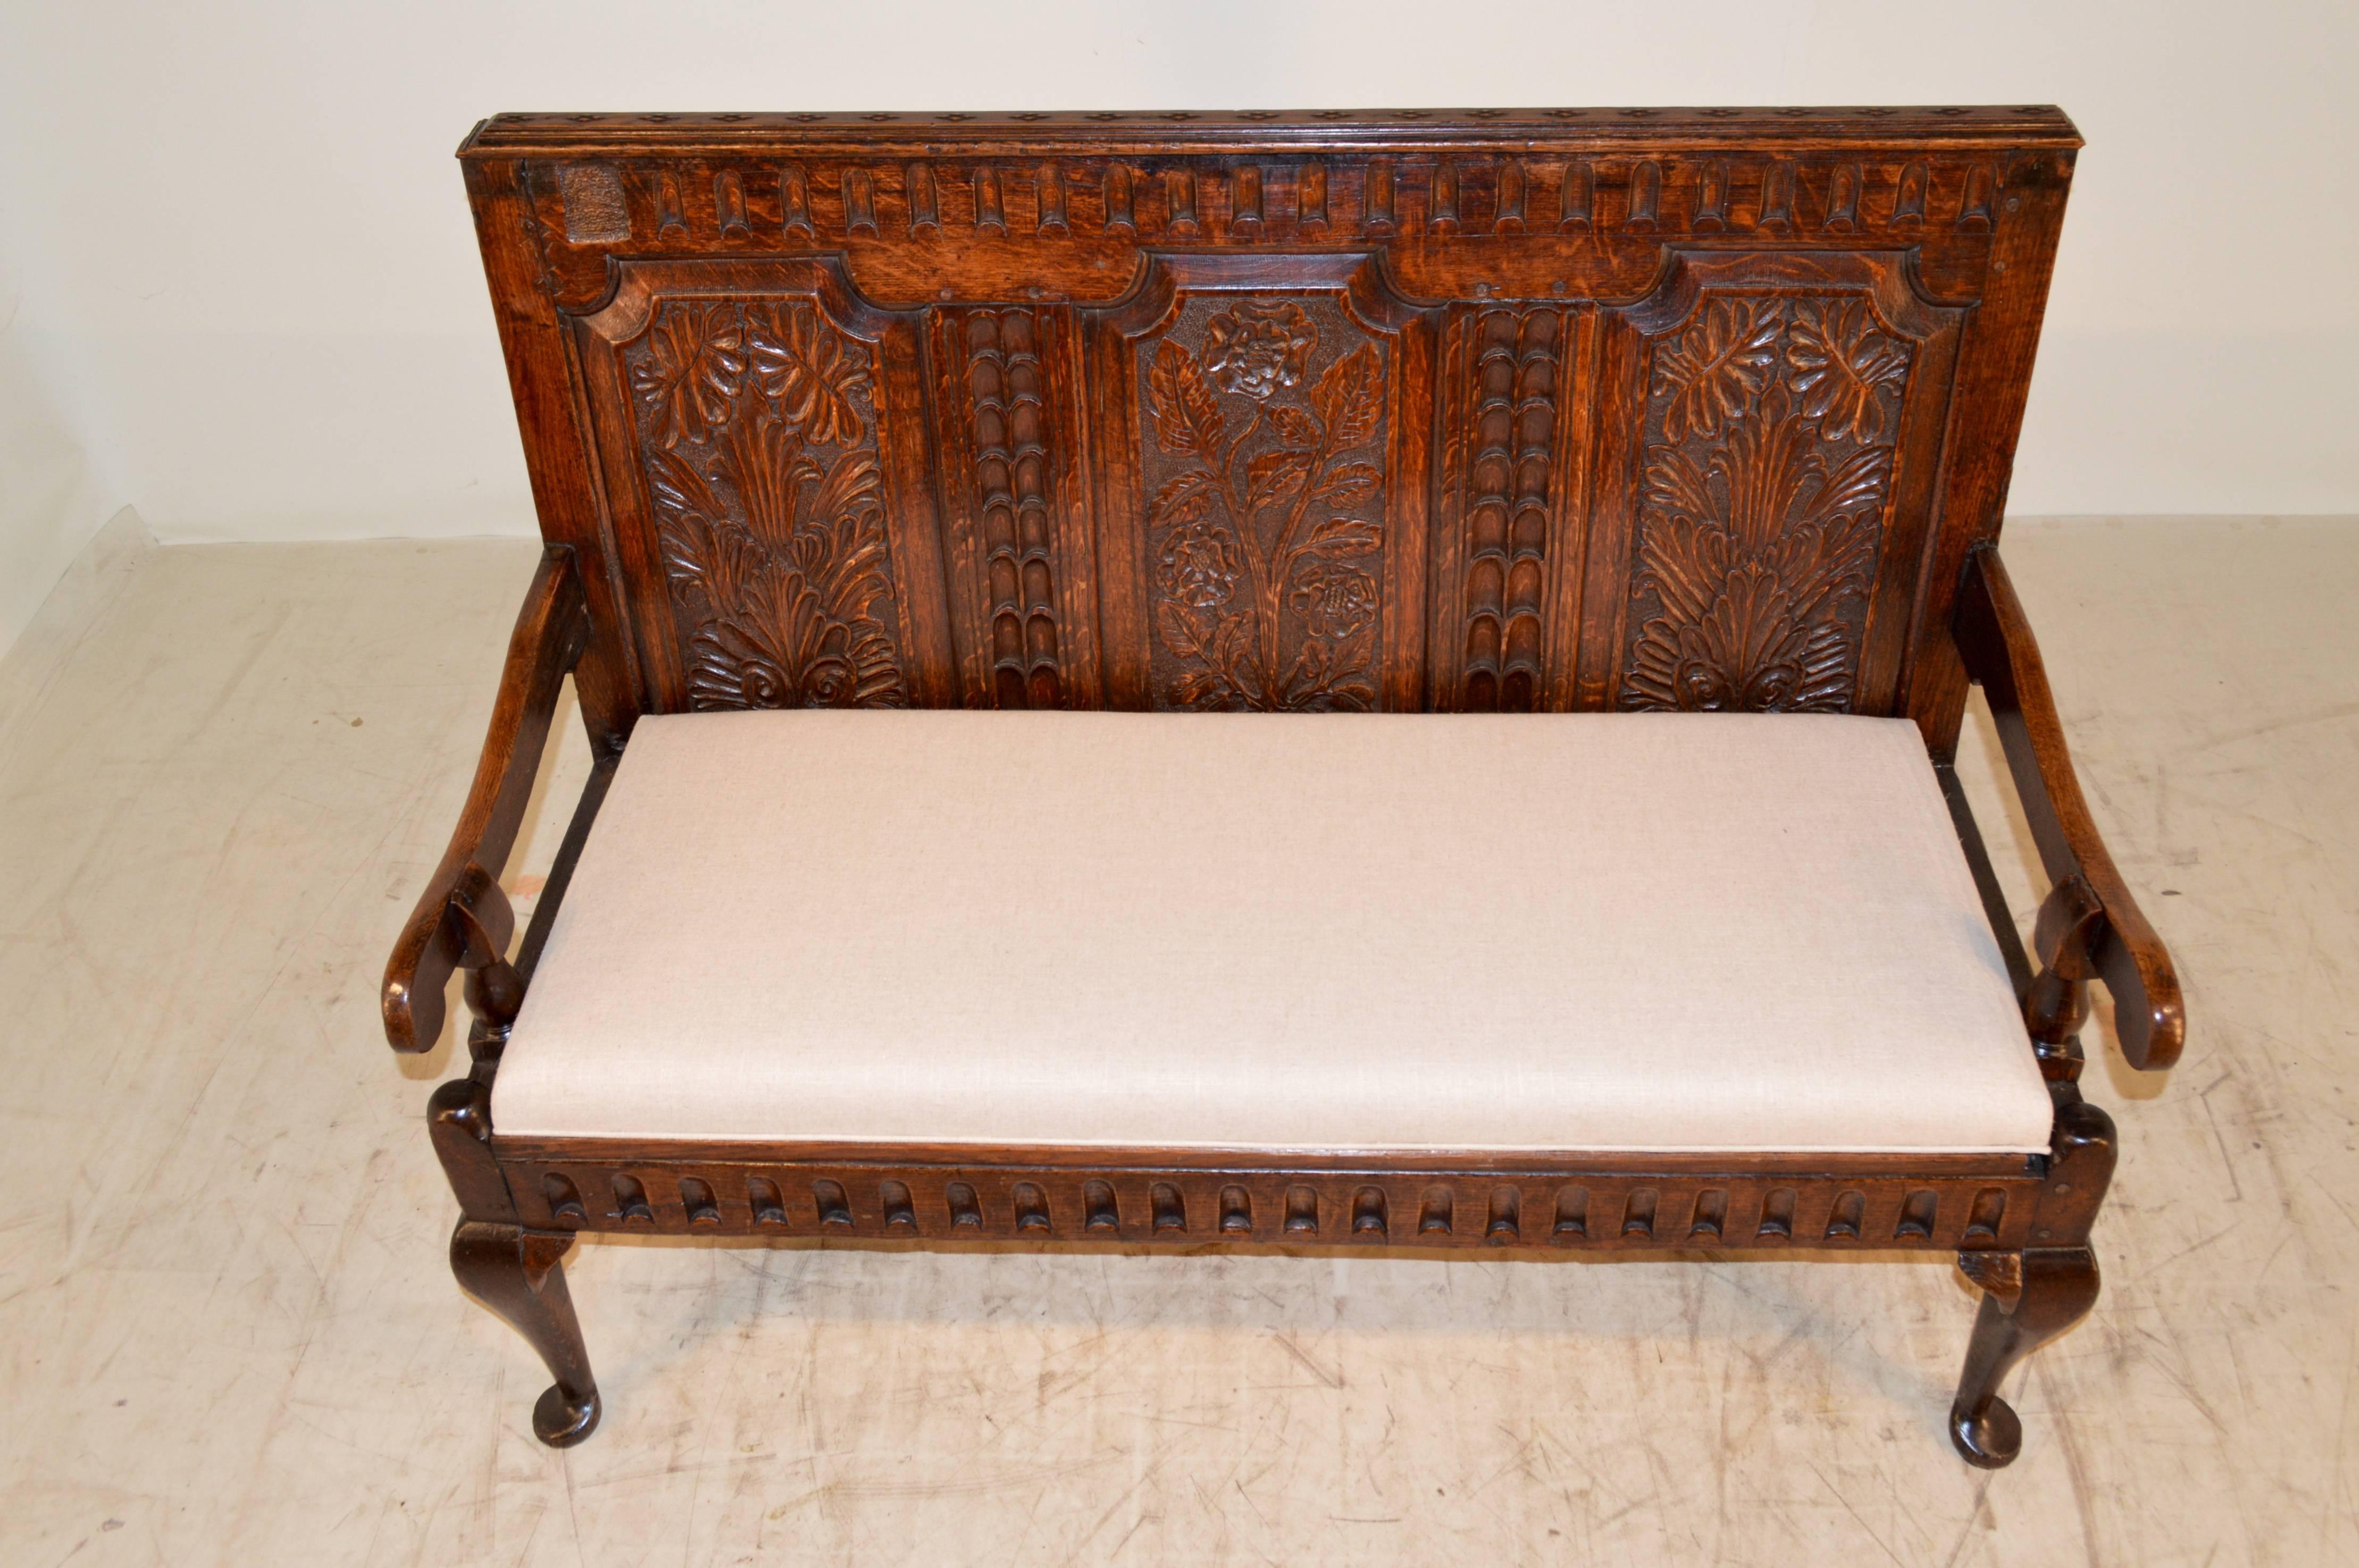 Carved Early 18th Century English Oak Settle